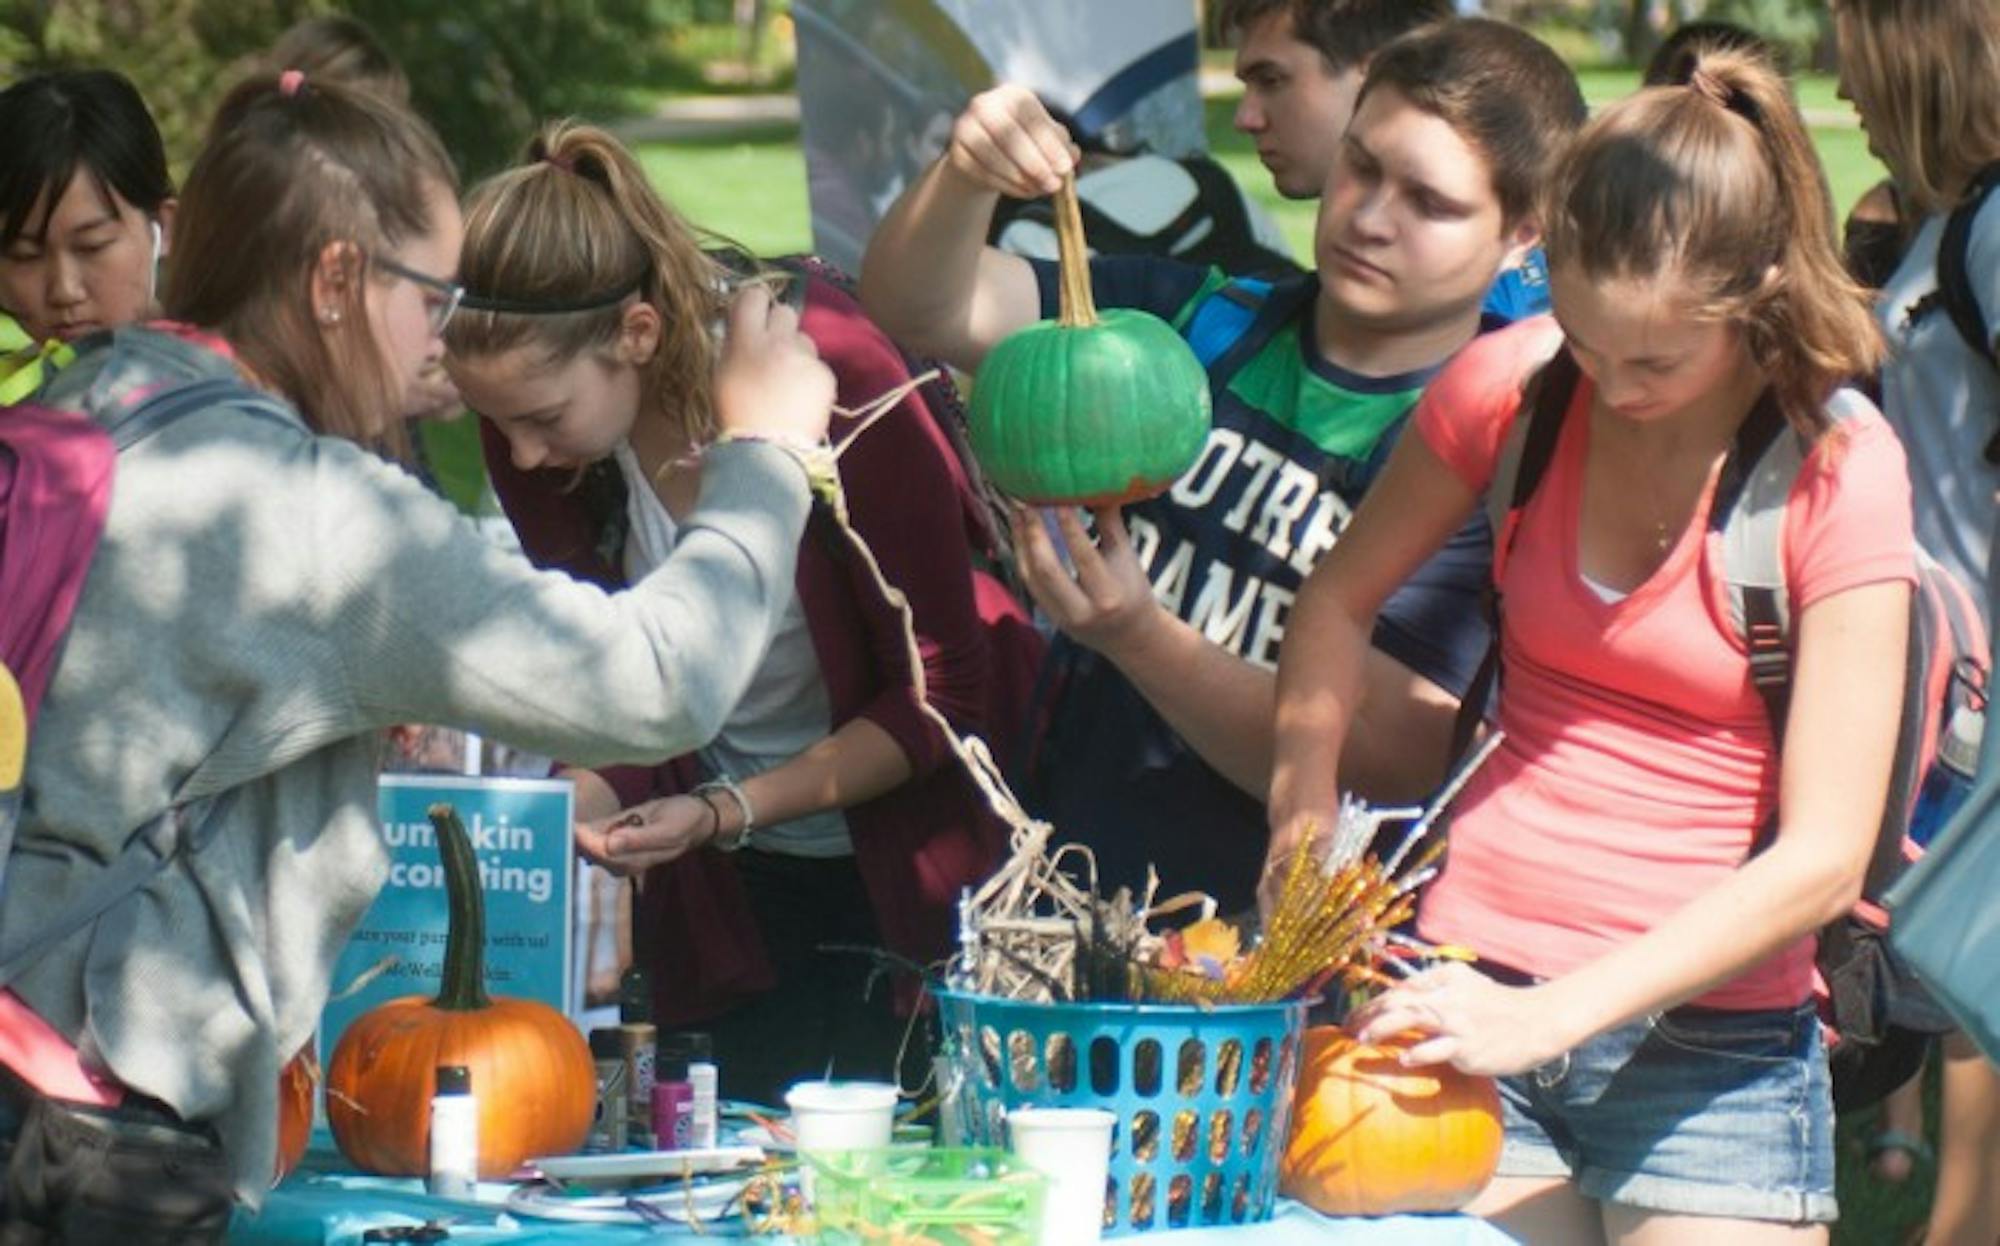 Students decorate pumpkins and participate in crafting activities at the Wellness Expo.